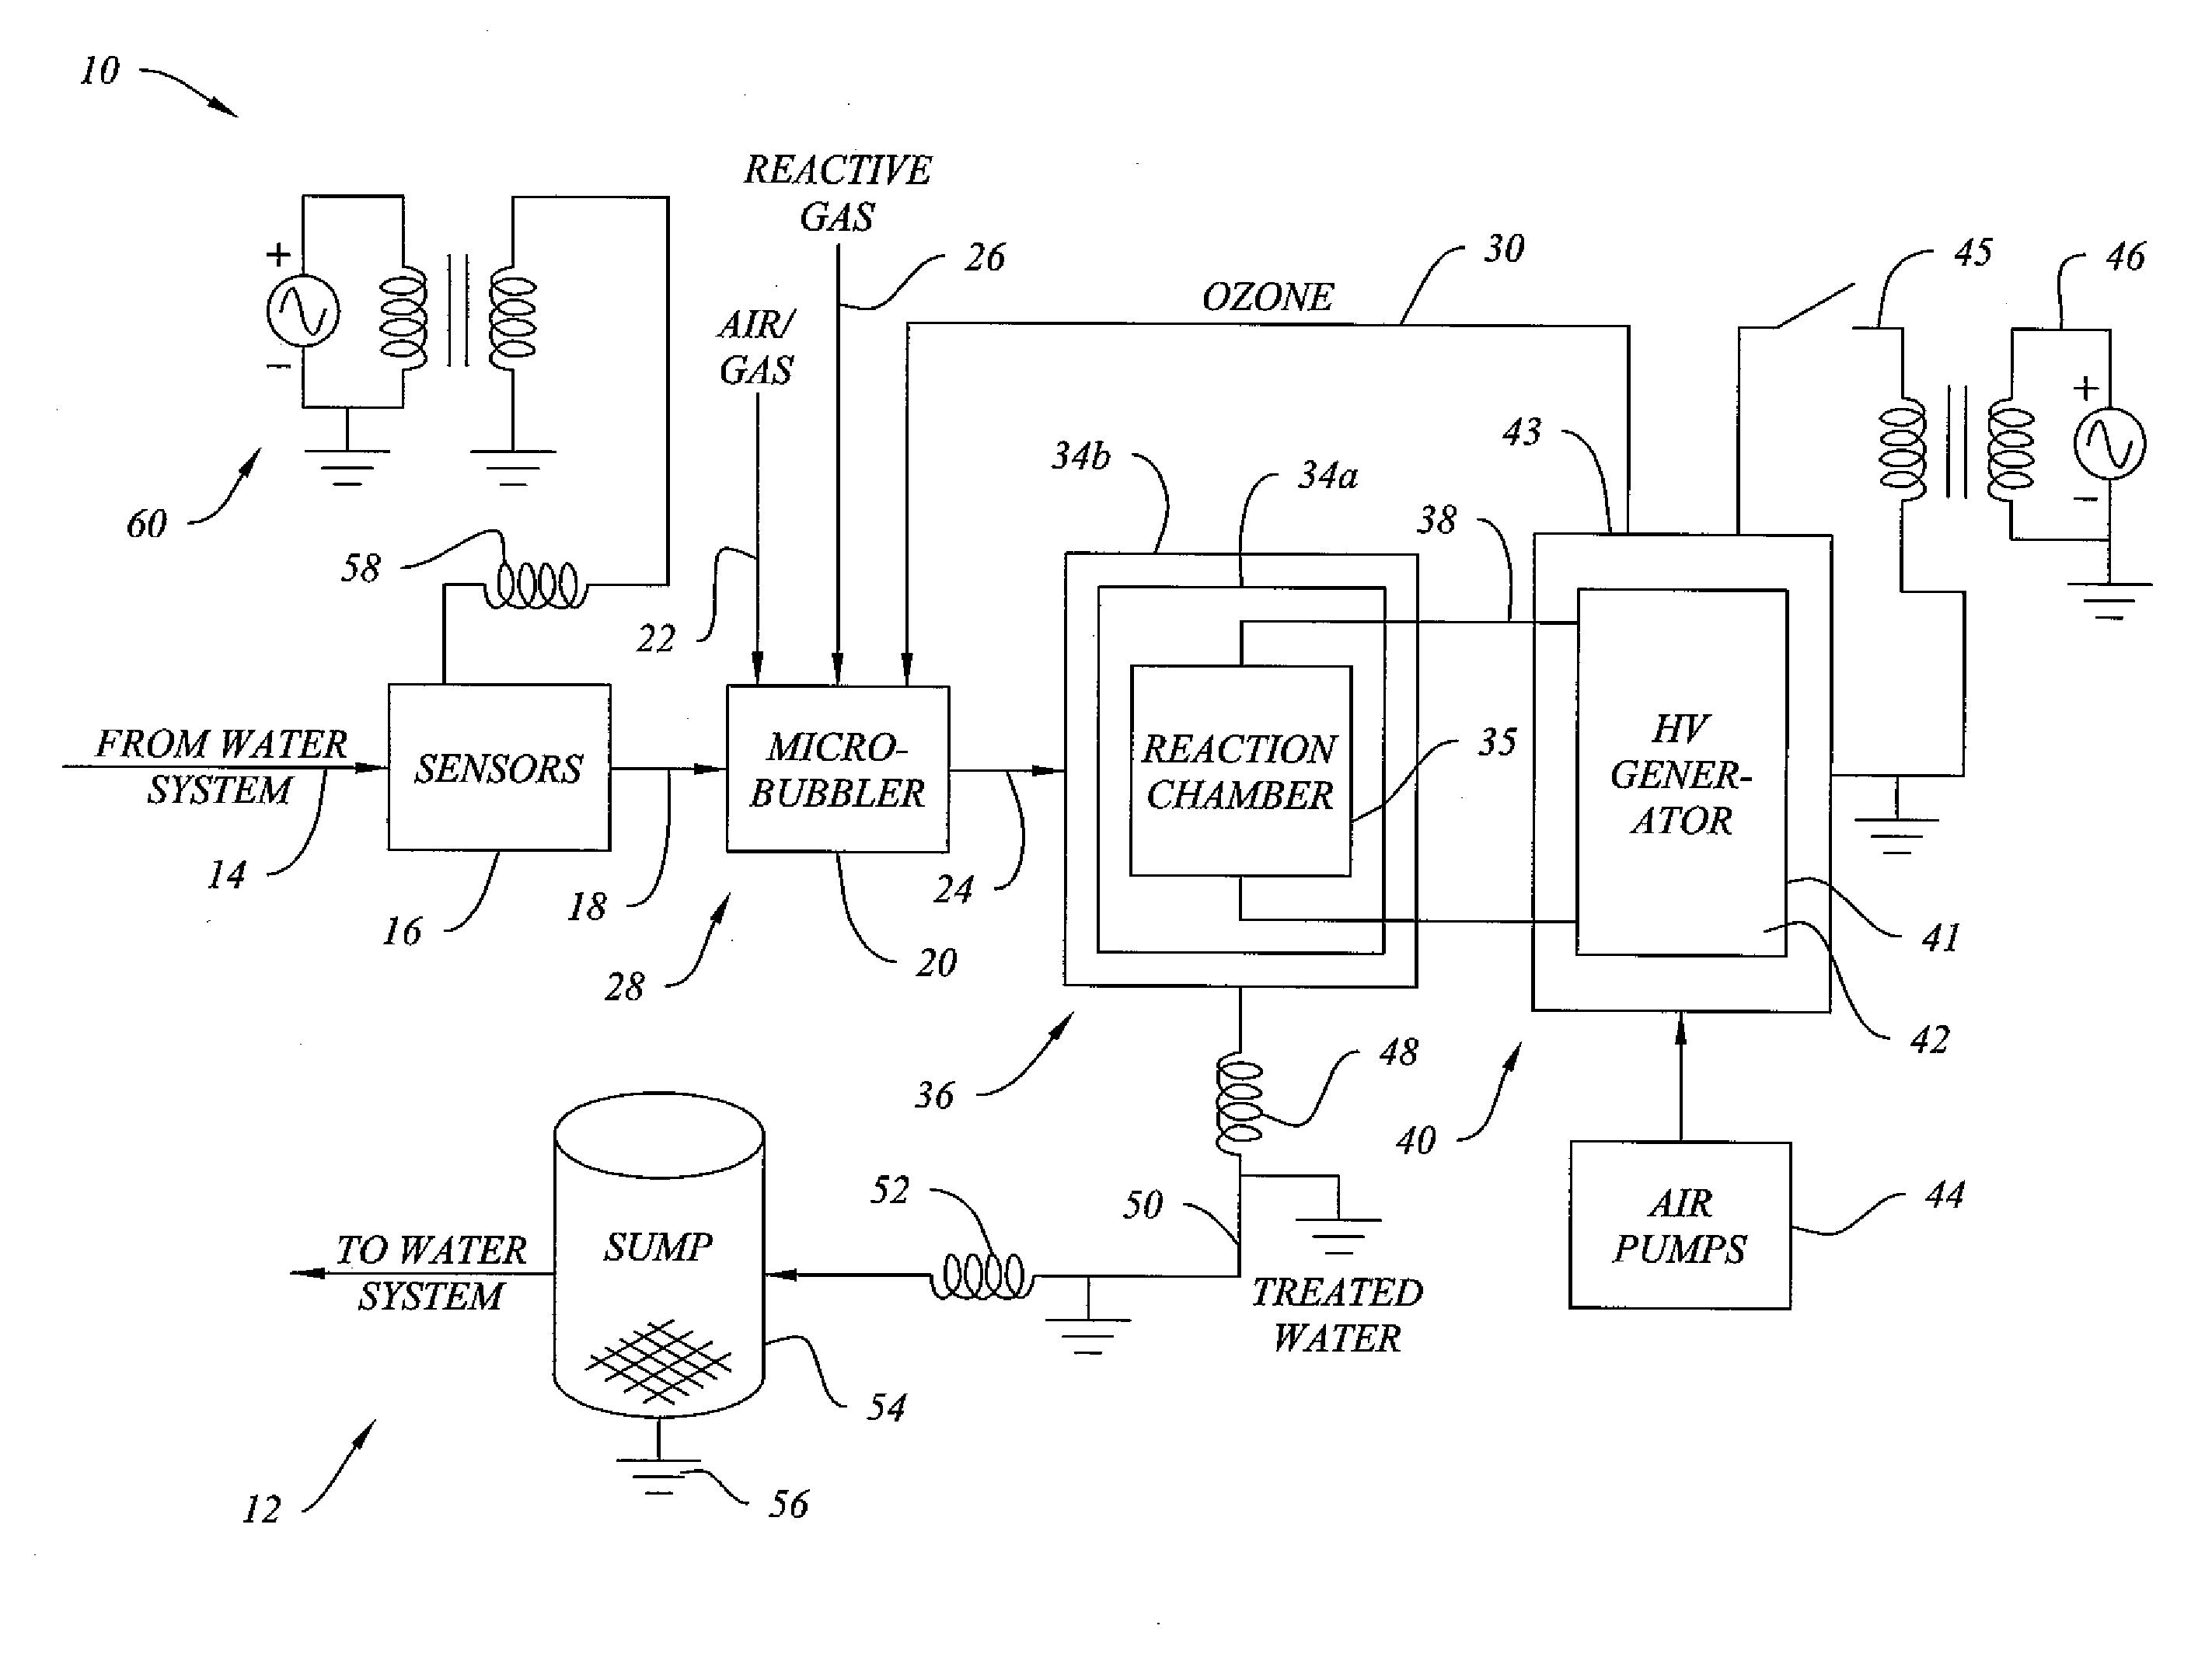 System and Method for Treating Water Systems with High Voltage Discharge and Ozone